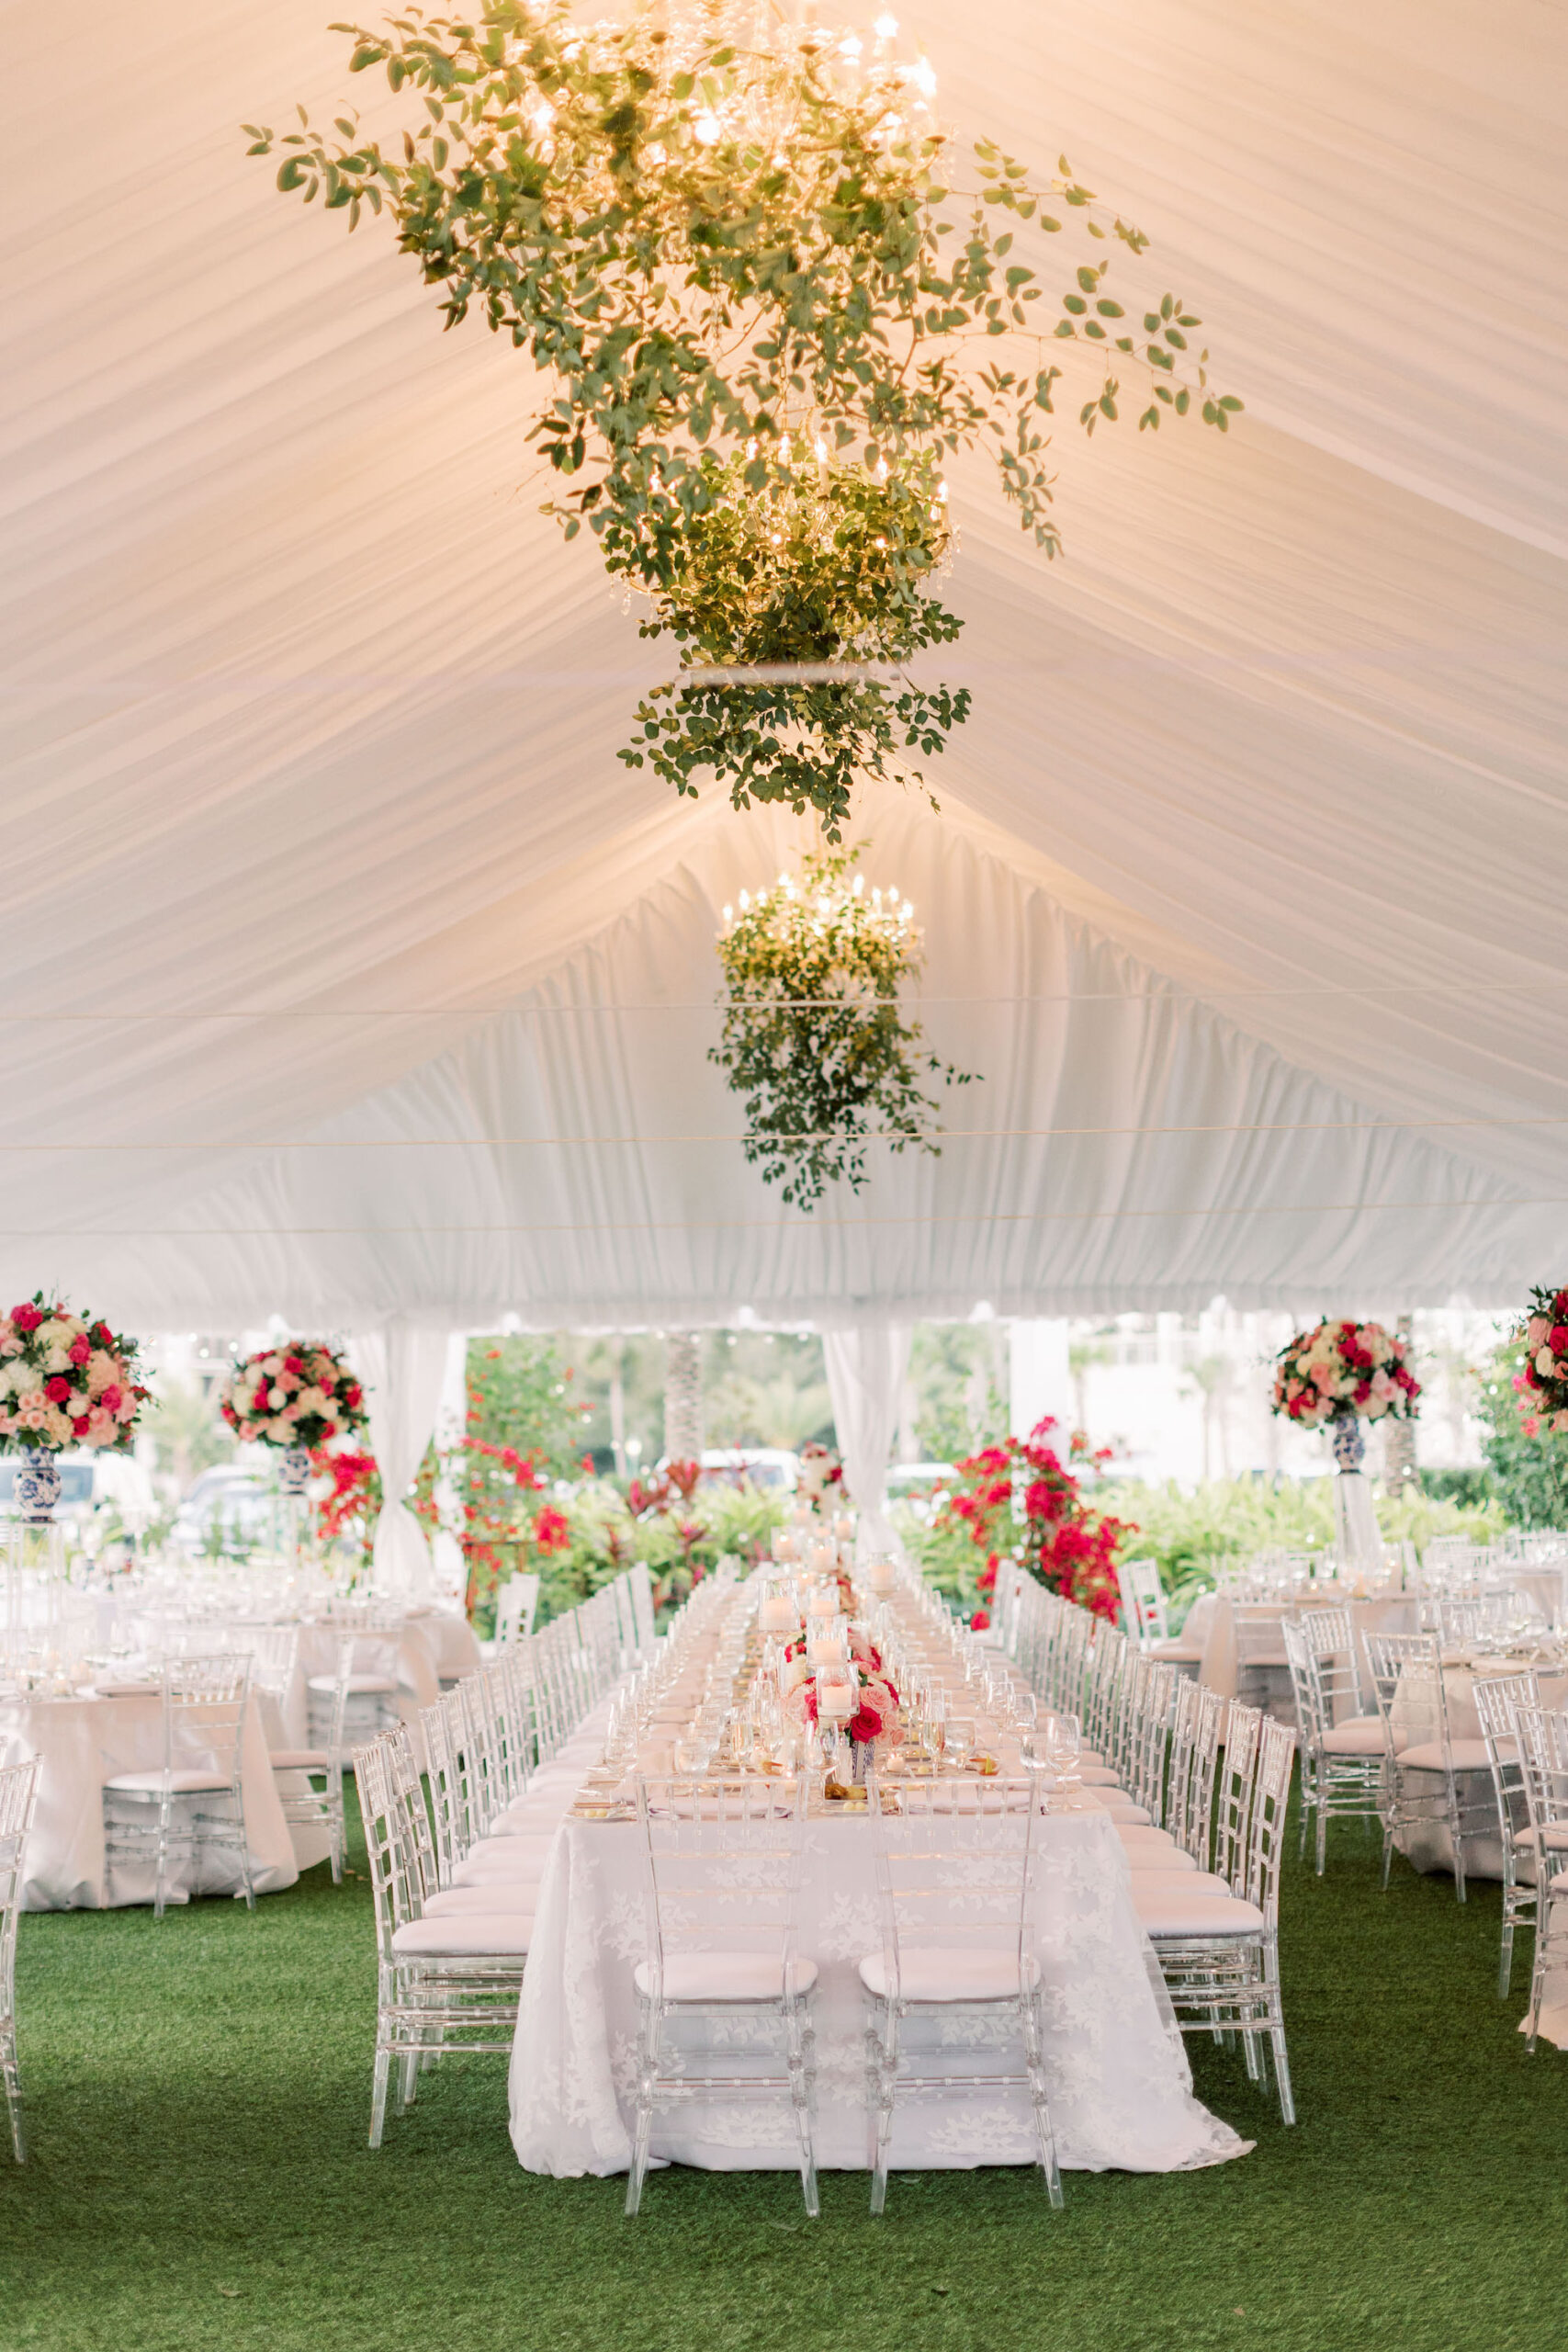 Wedding reception tent, with decor provided by Gabro Event Services, an event rental company in Tampa, FL.